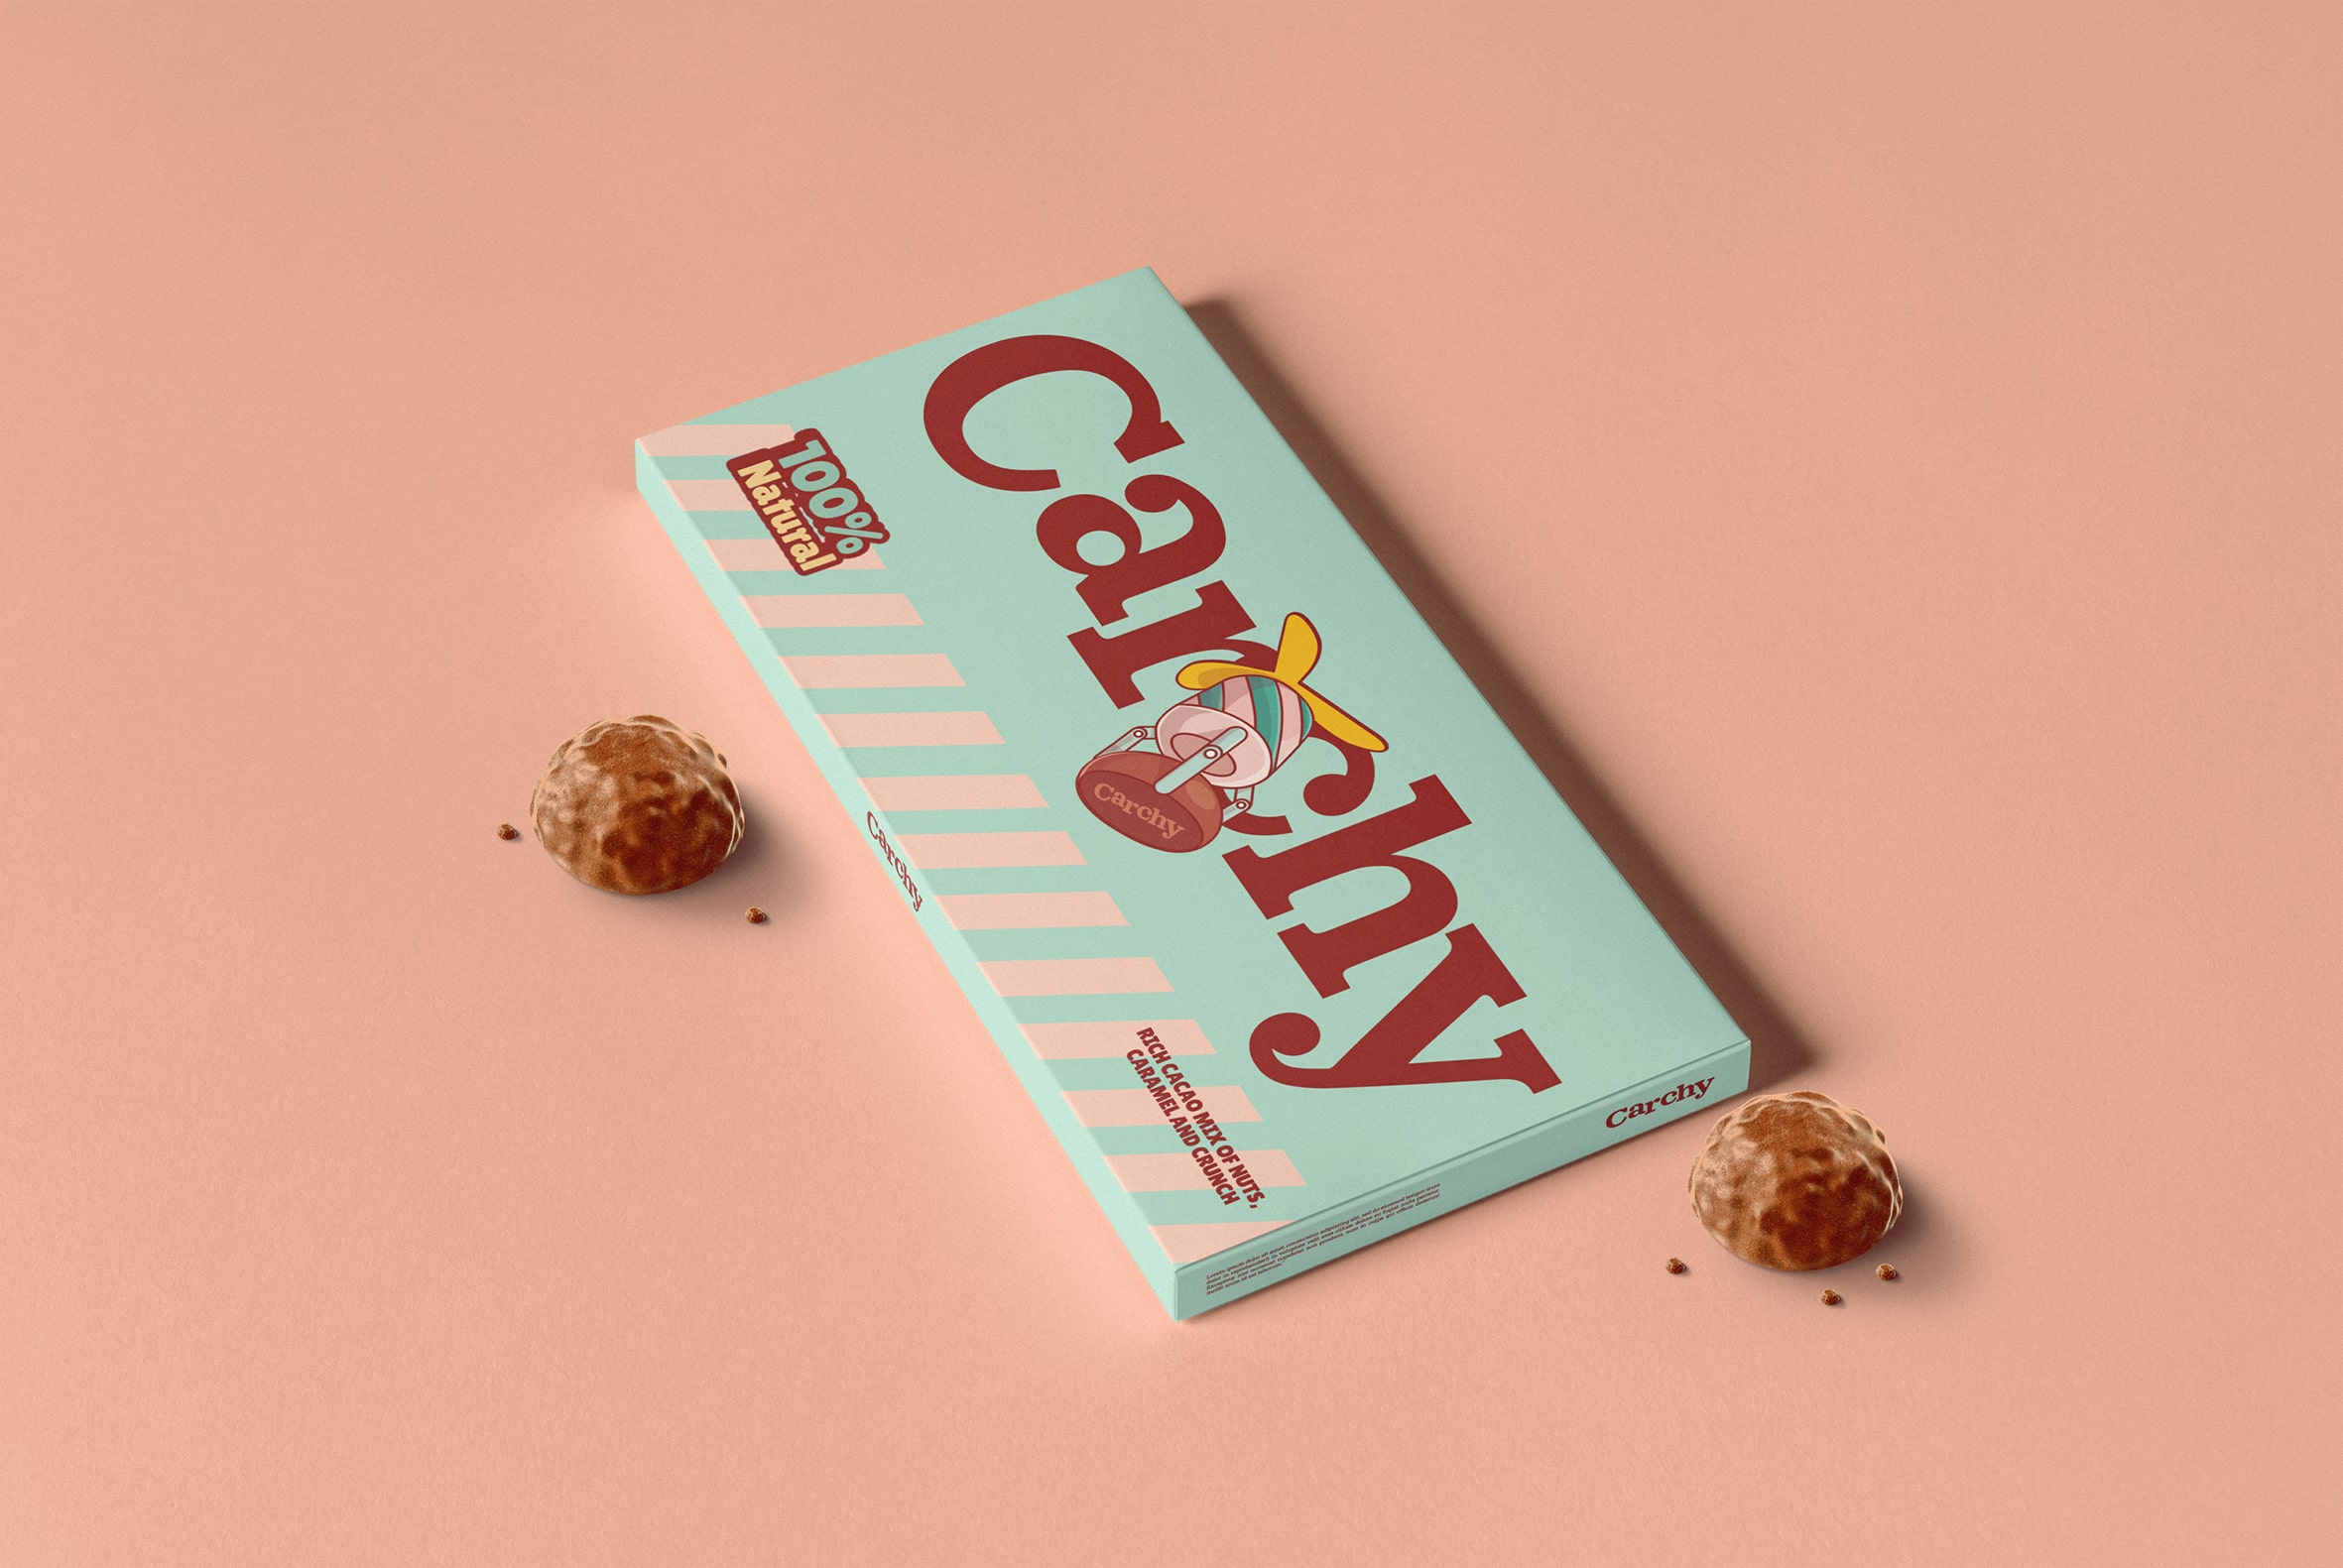 Sheikh Branding Creates Packaging Design for Carchy Hand Made Chocolate